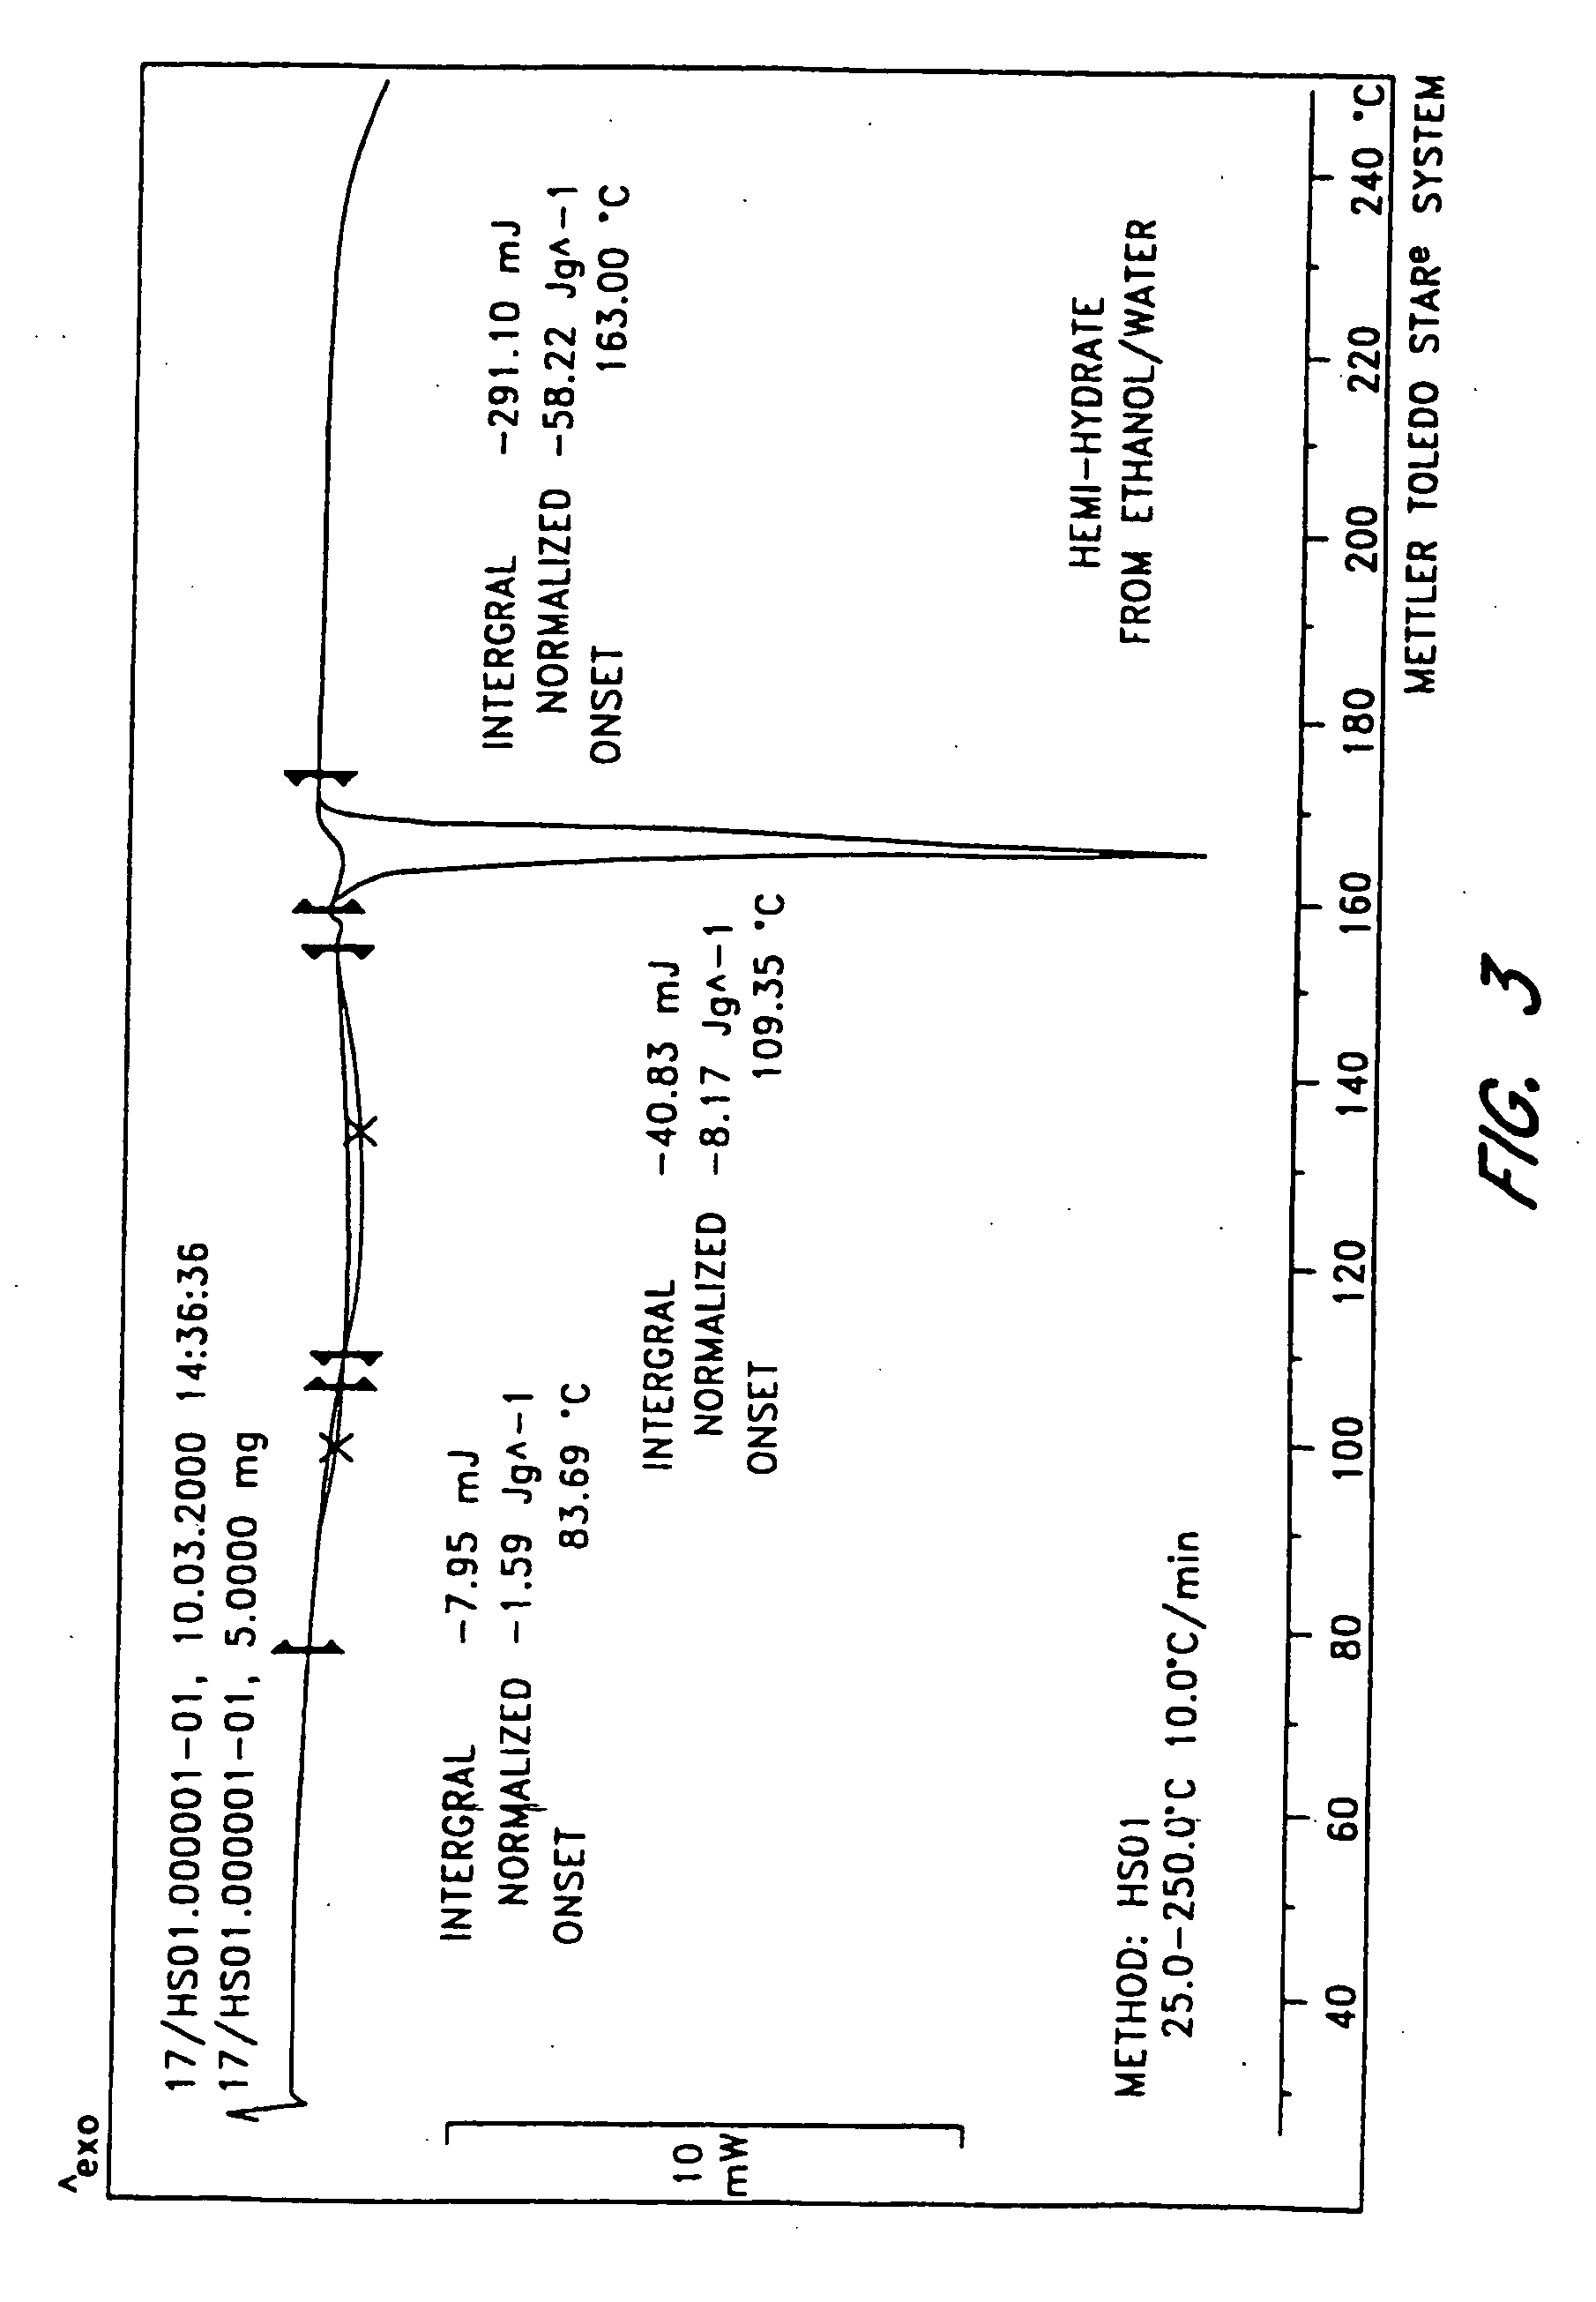 Pharmaceutical treatments and compositions